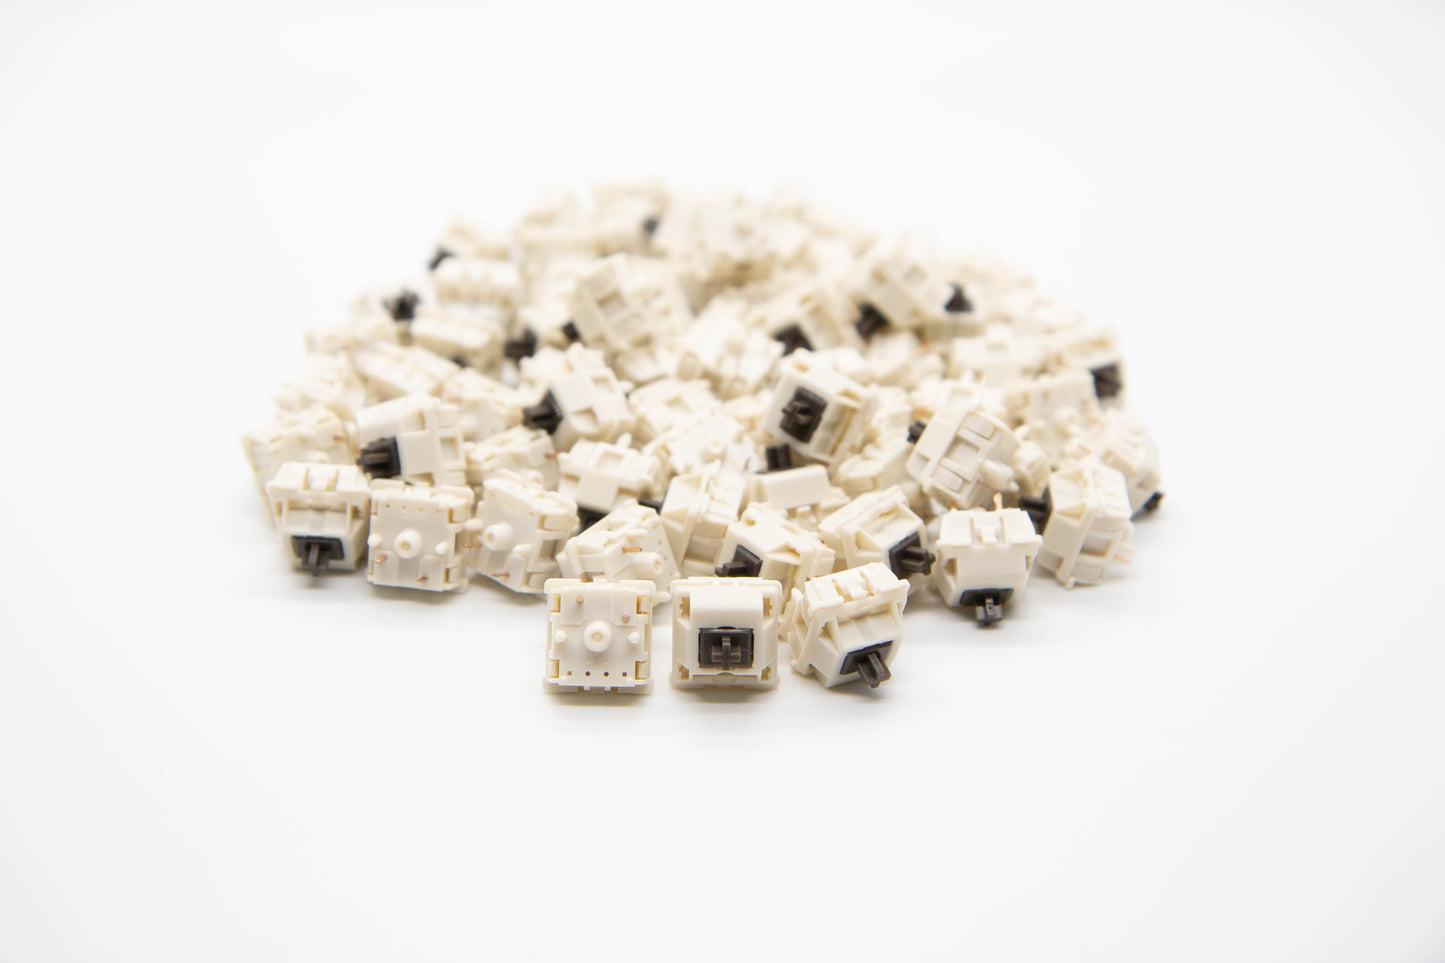 Close-up shot of a pile of Koala themed mechanical keyboard switches featuring white housing and dark brown stems